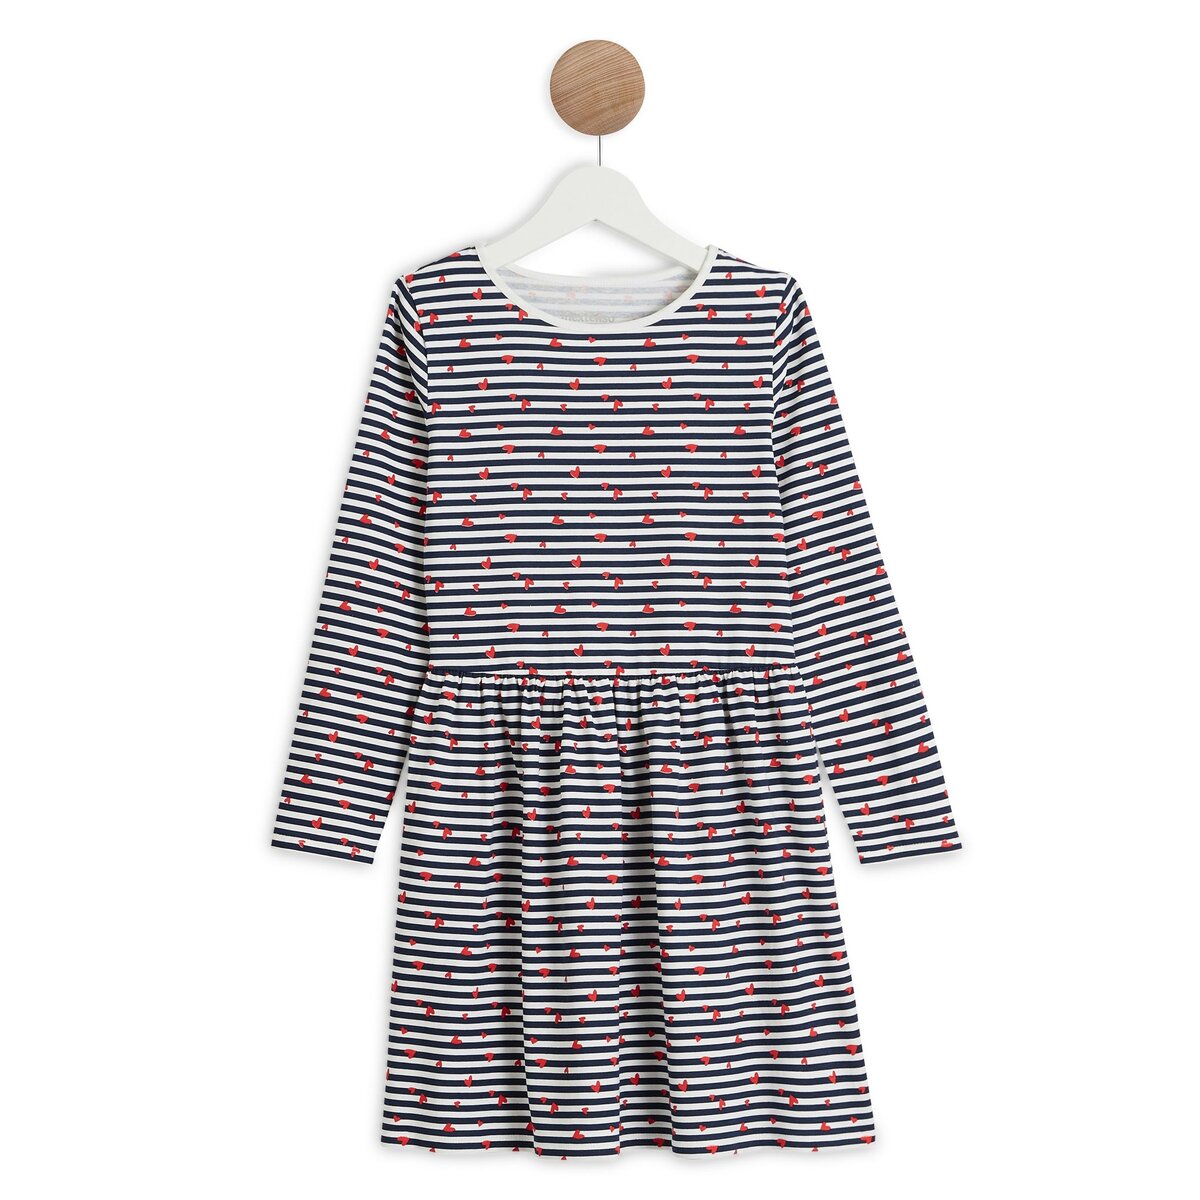 INEXTENSO Robe manches longues léopard fille